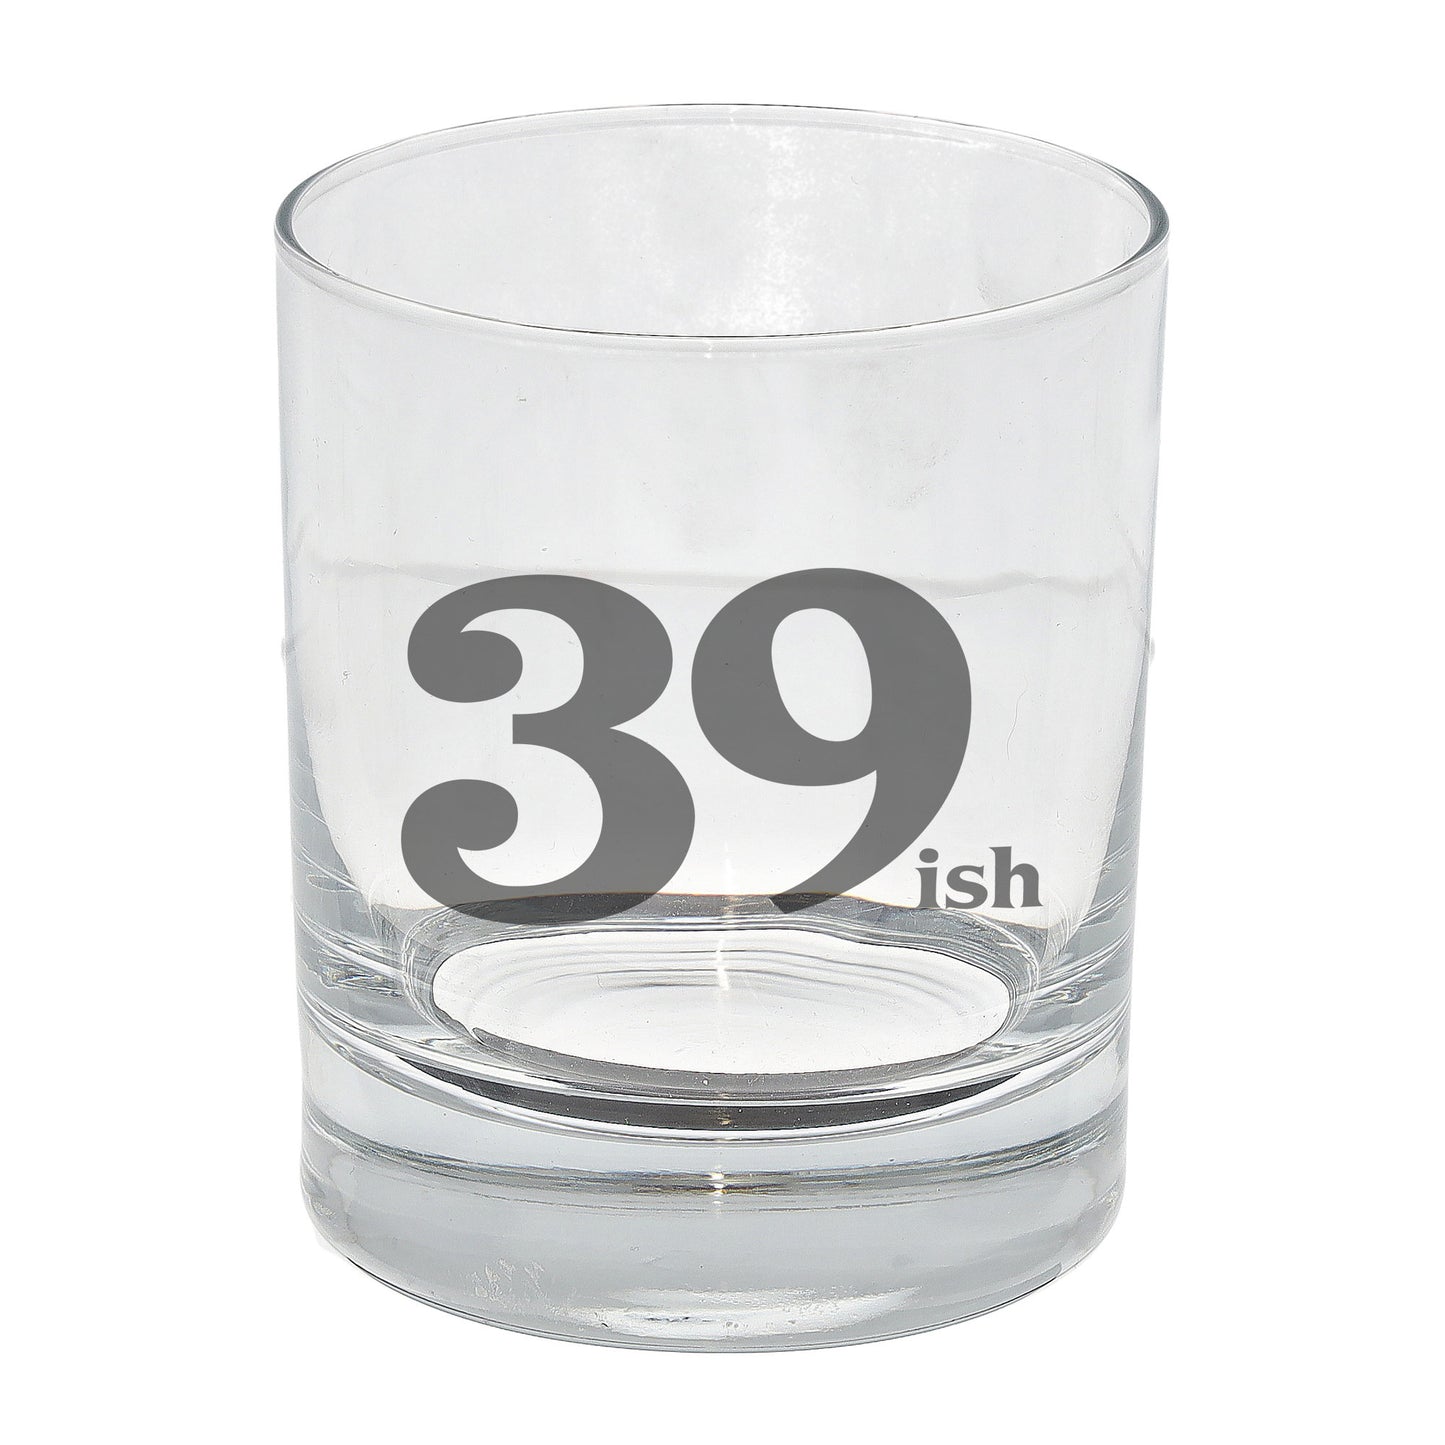 39ish Whisky Glass and/or Coaster Set  - Always Looking Good - Whisky Glass On Its Own  